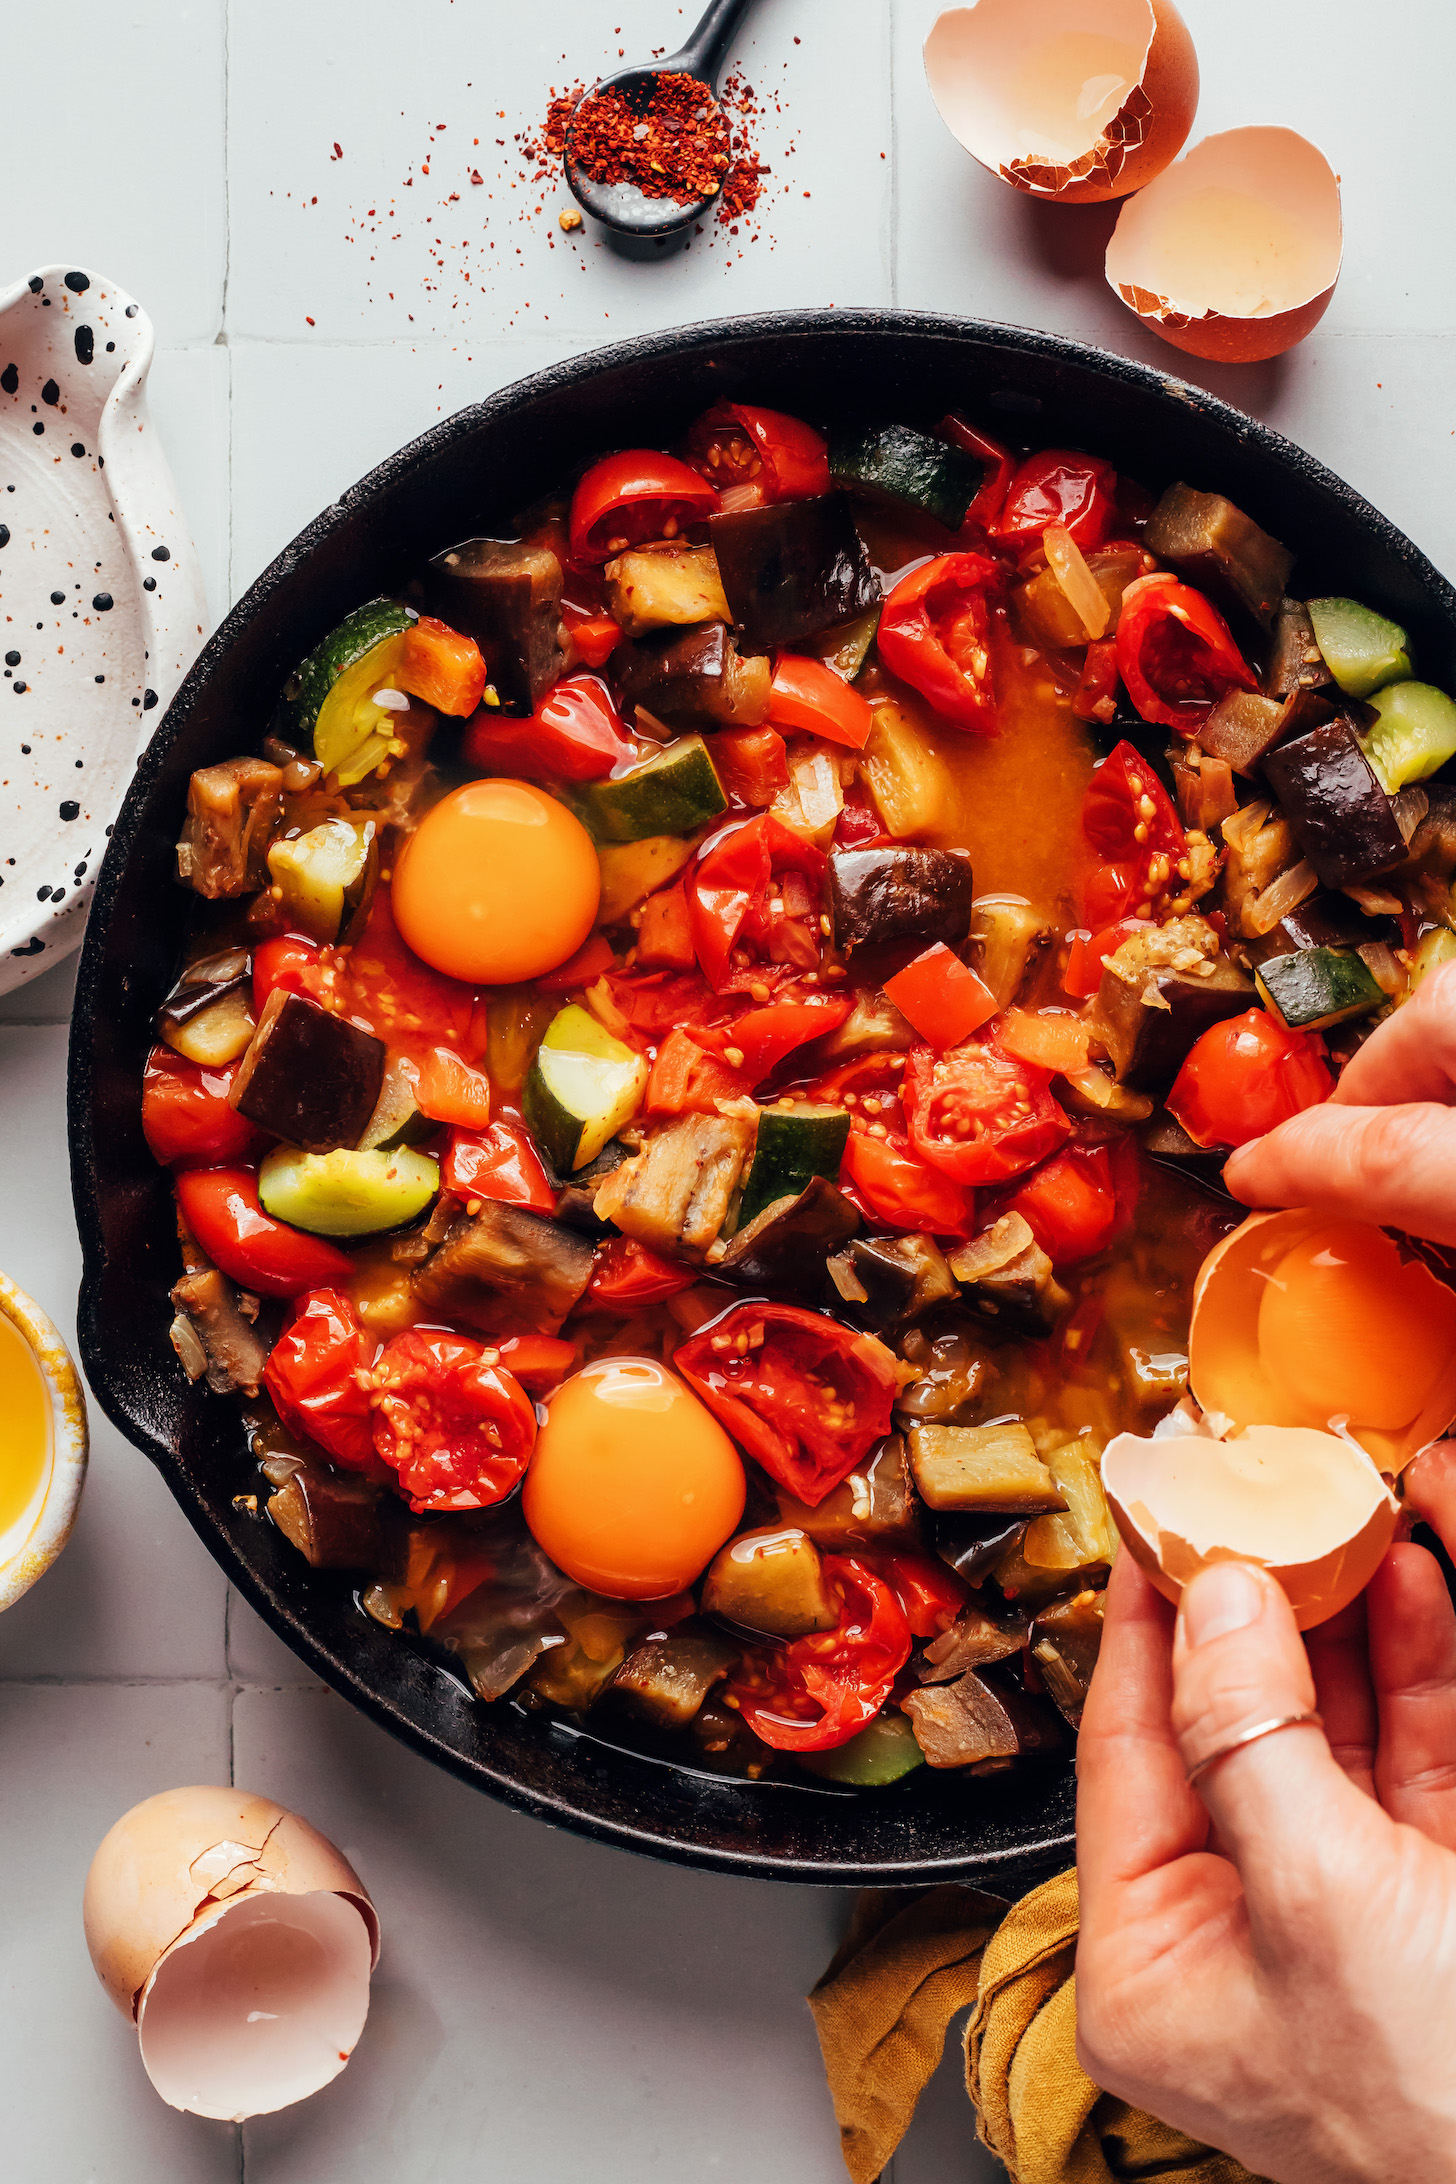 Cracking eggs into a pan of sautéed vegetables